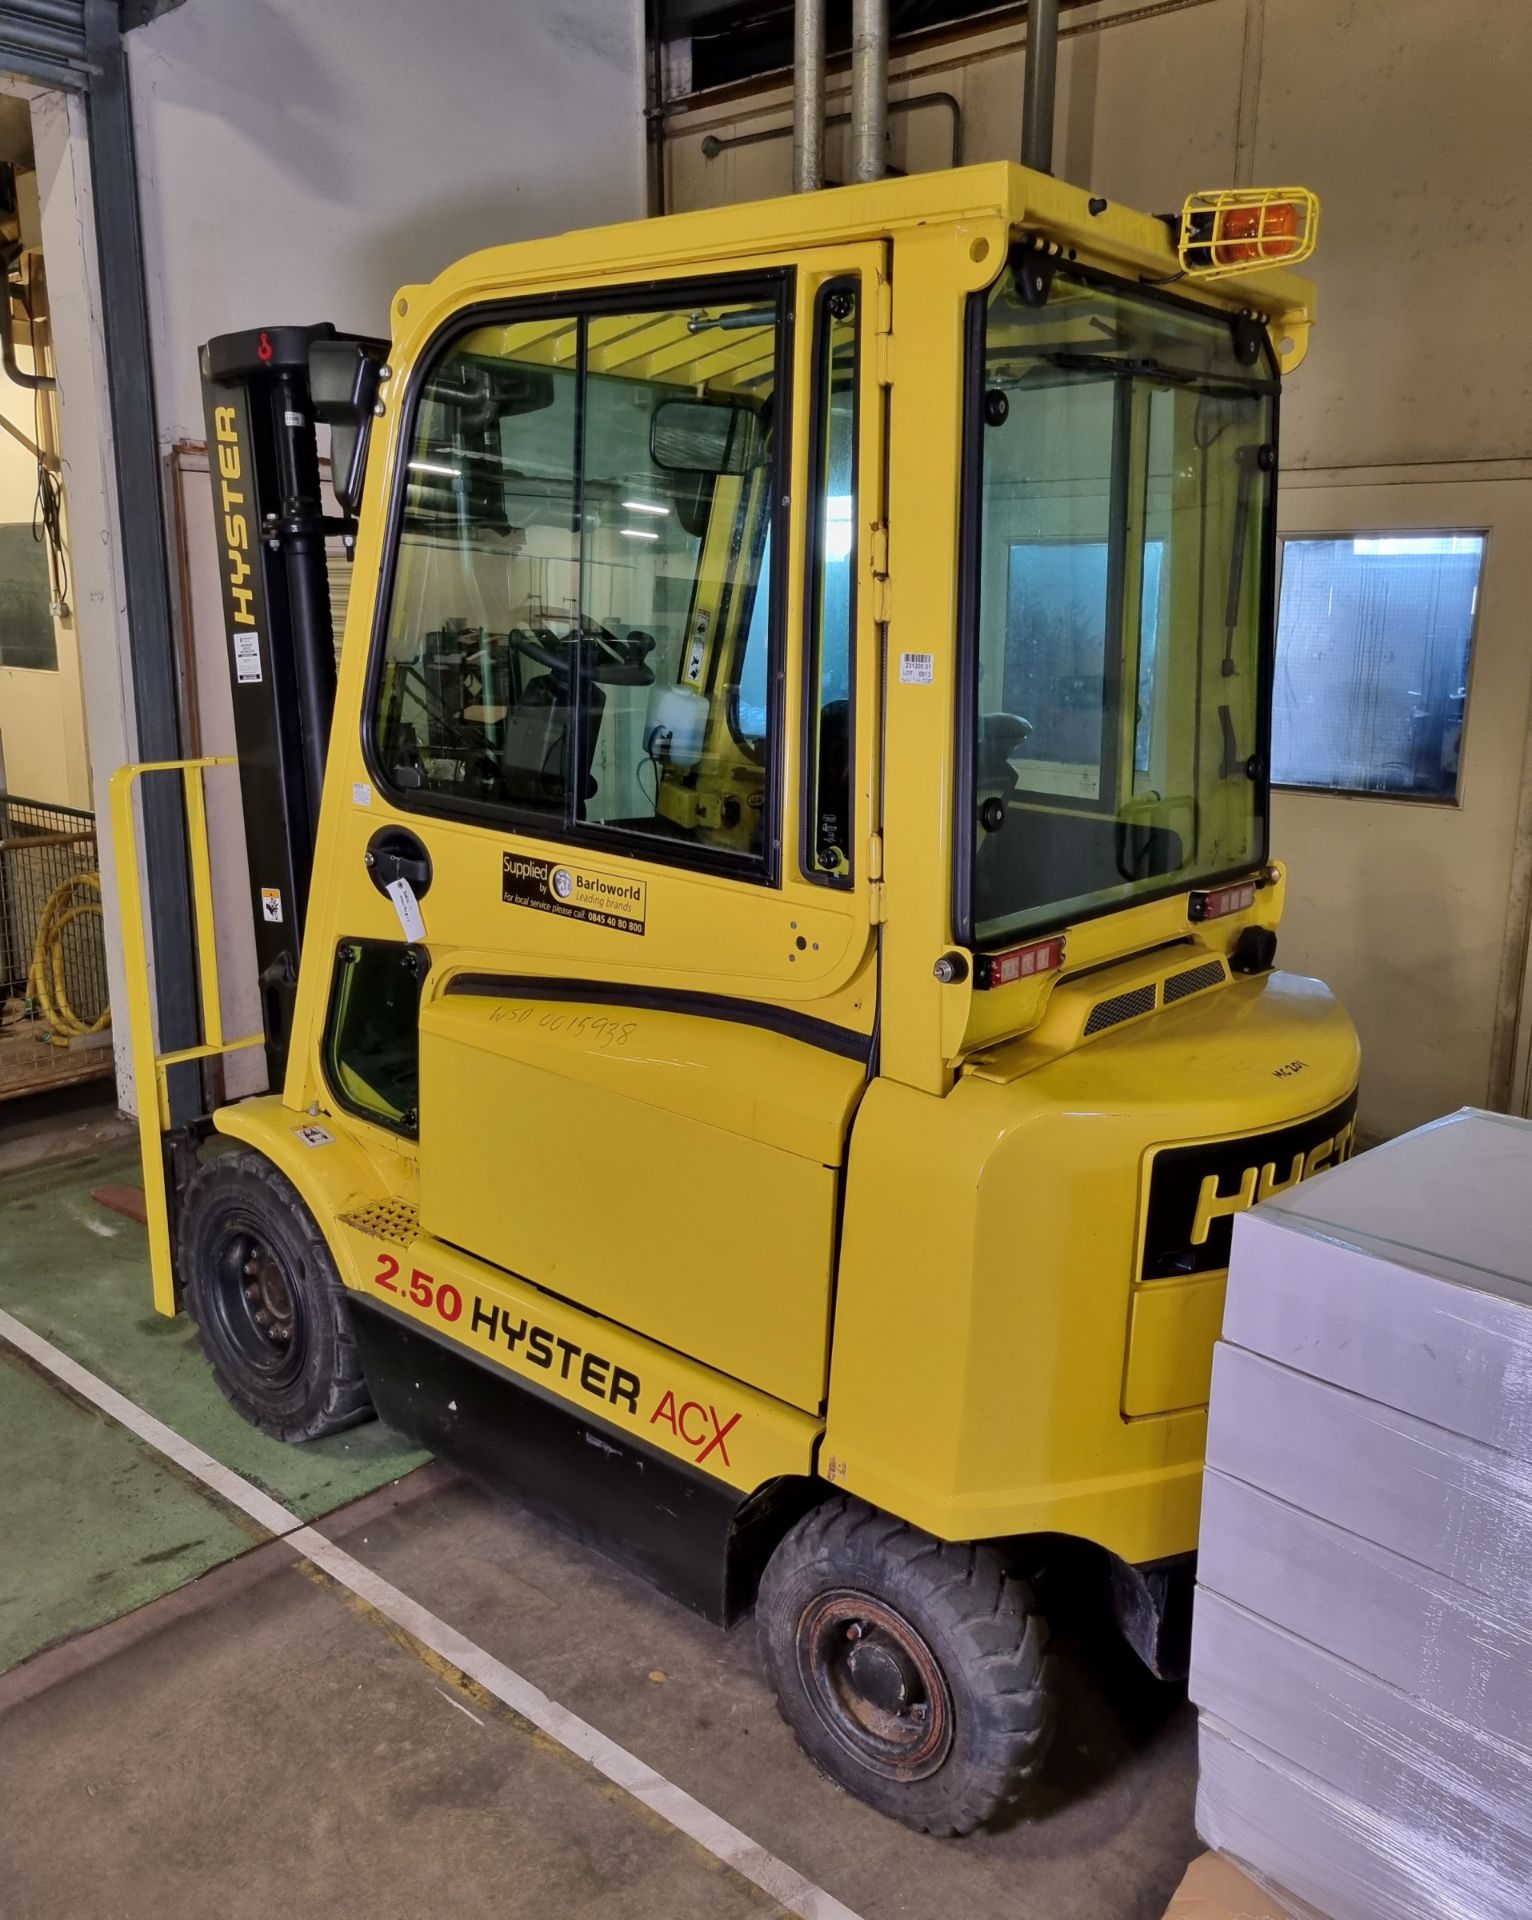 Hyster ACX J2.50XM-717 4-wheel electric forklift truck - full details in the description - Image 4 of 21